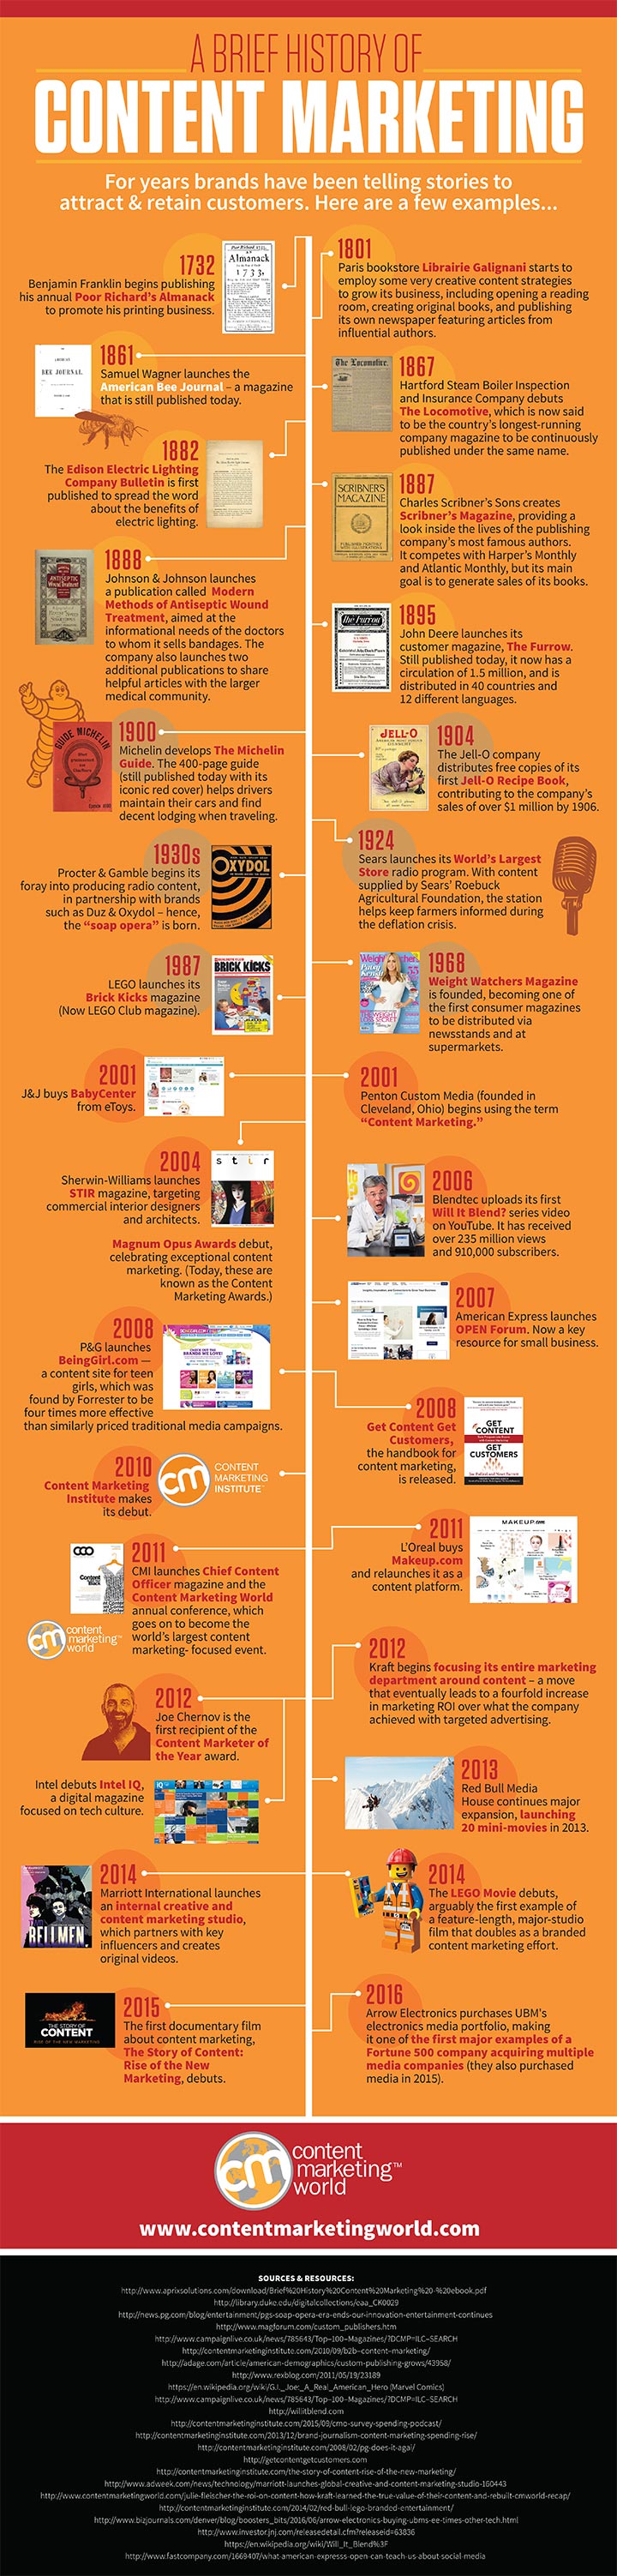 History-of-Content-Marketing-Infographic